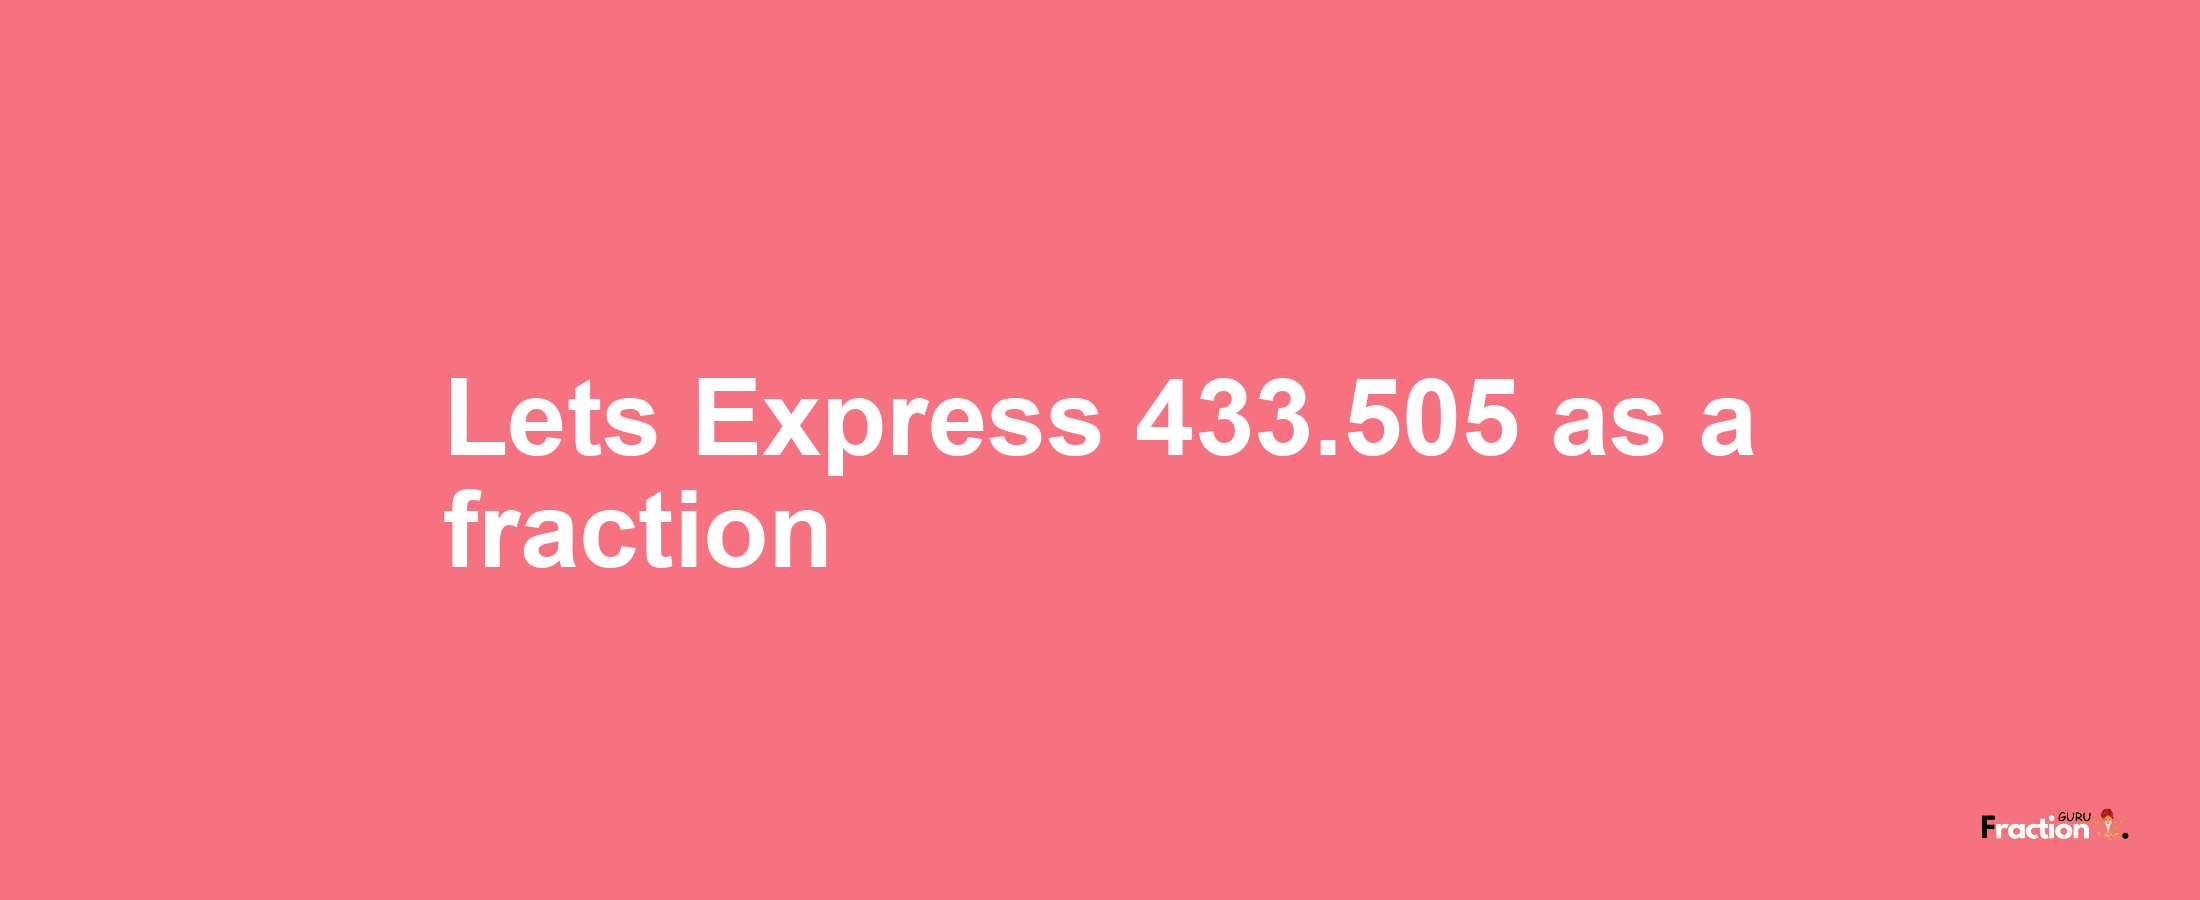 Lets Express 433.505 as afraction